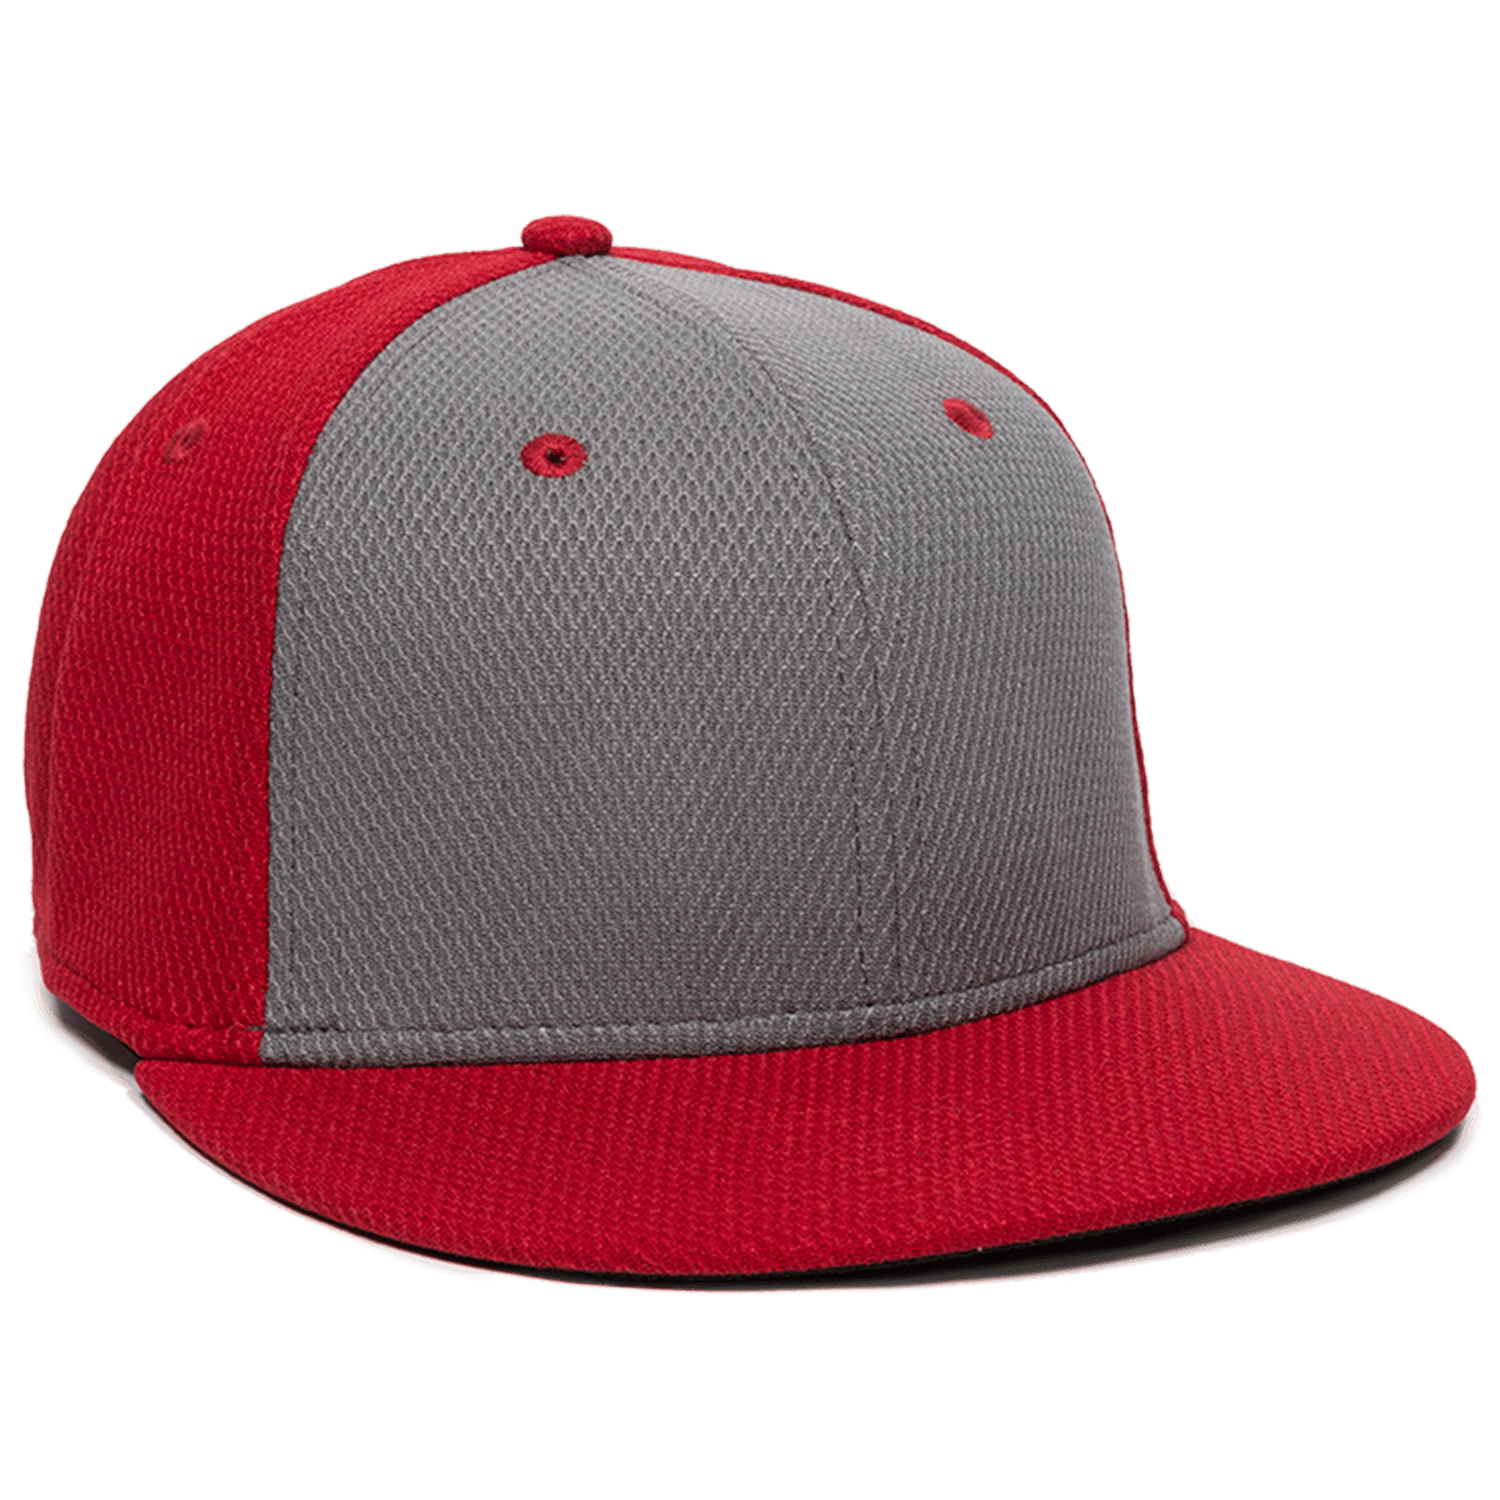 Crown High Proflex Hat with Flat Visor Fitted